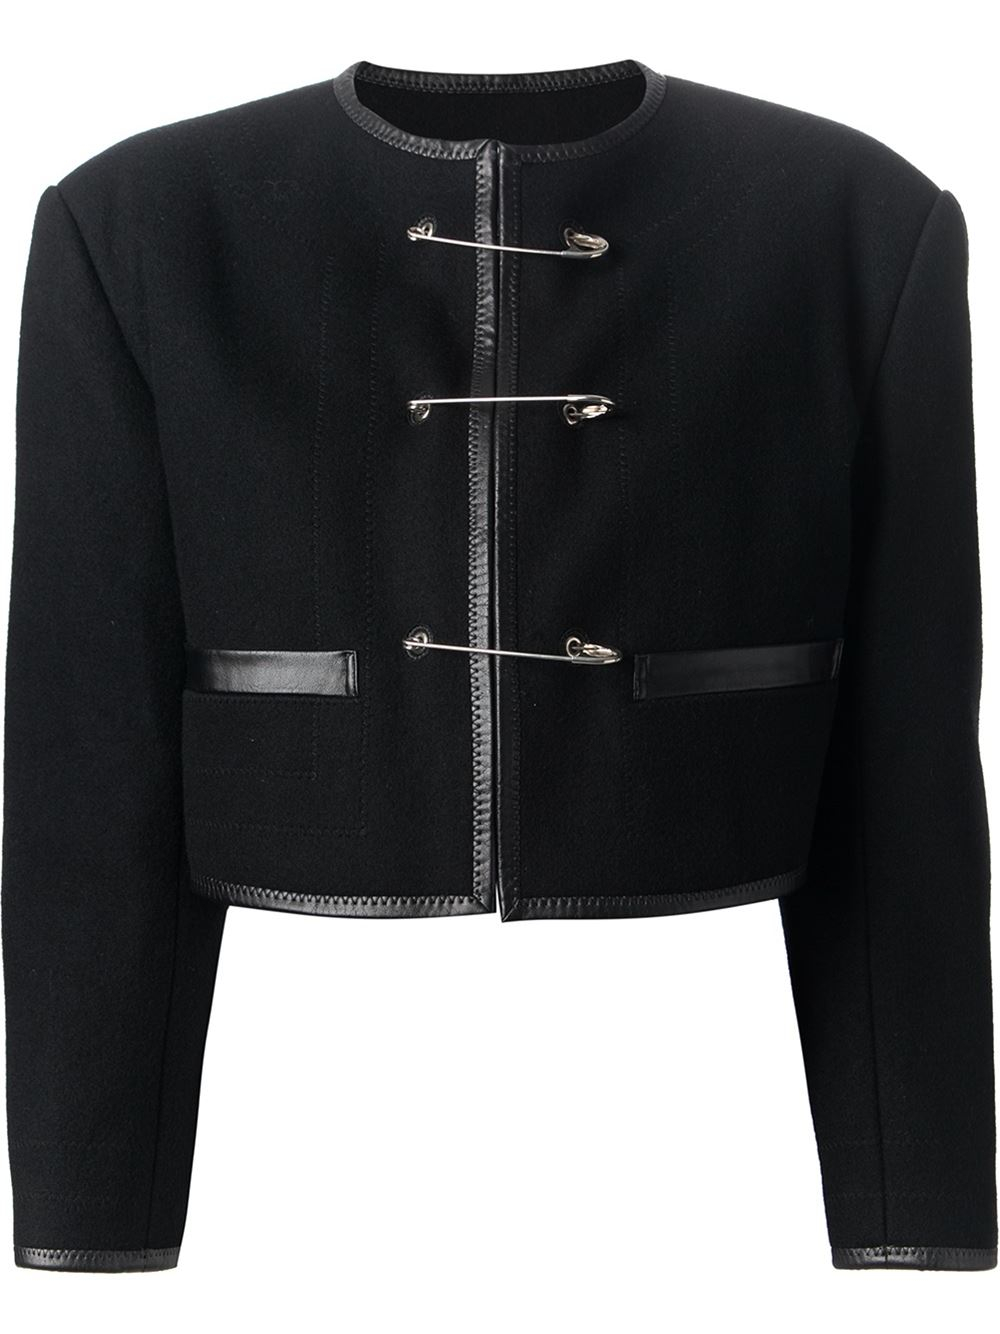 Jean paul gaultier Safety Pin Fastening Jacket in Black - Save 50% | Lyst